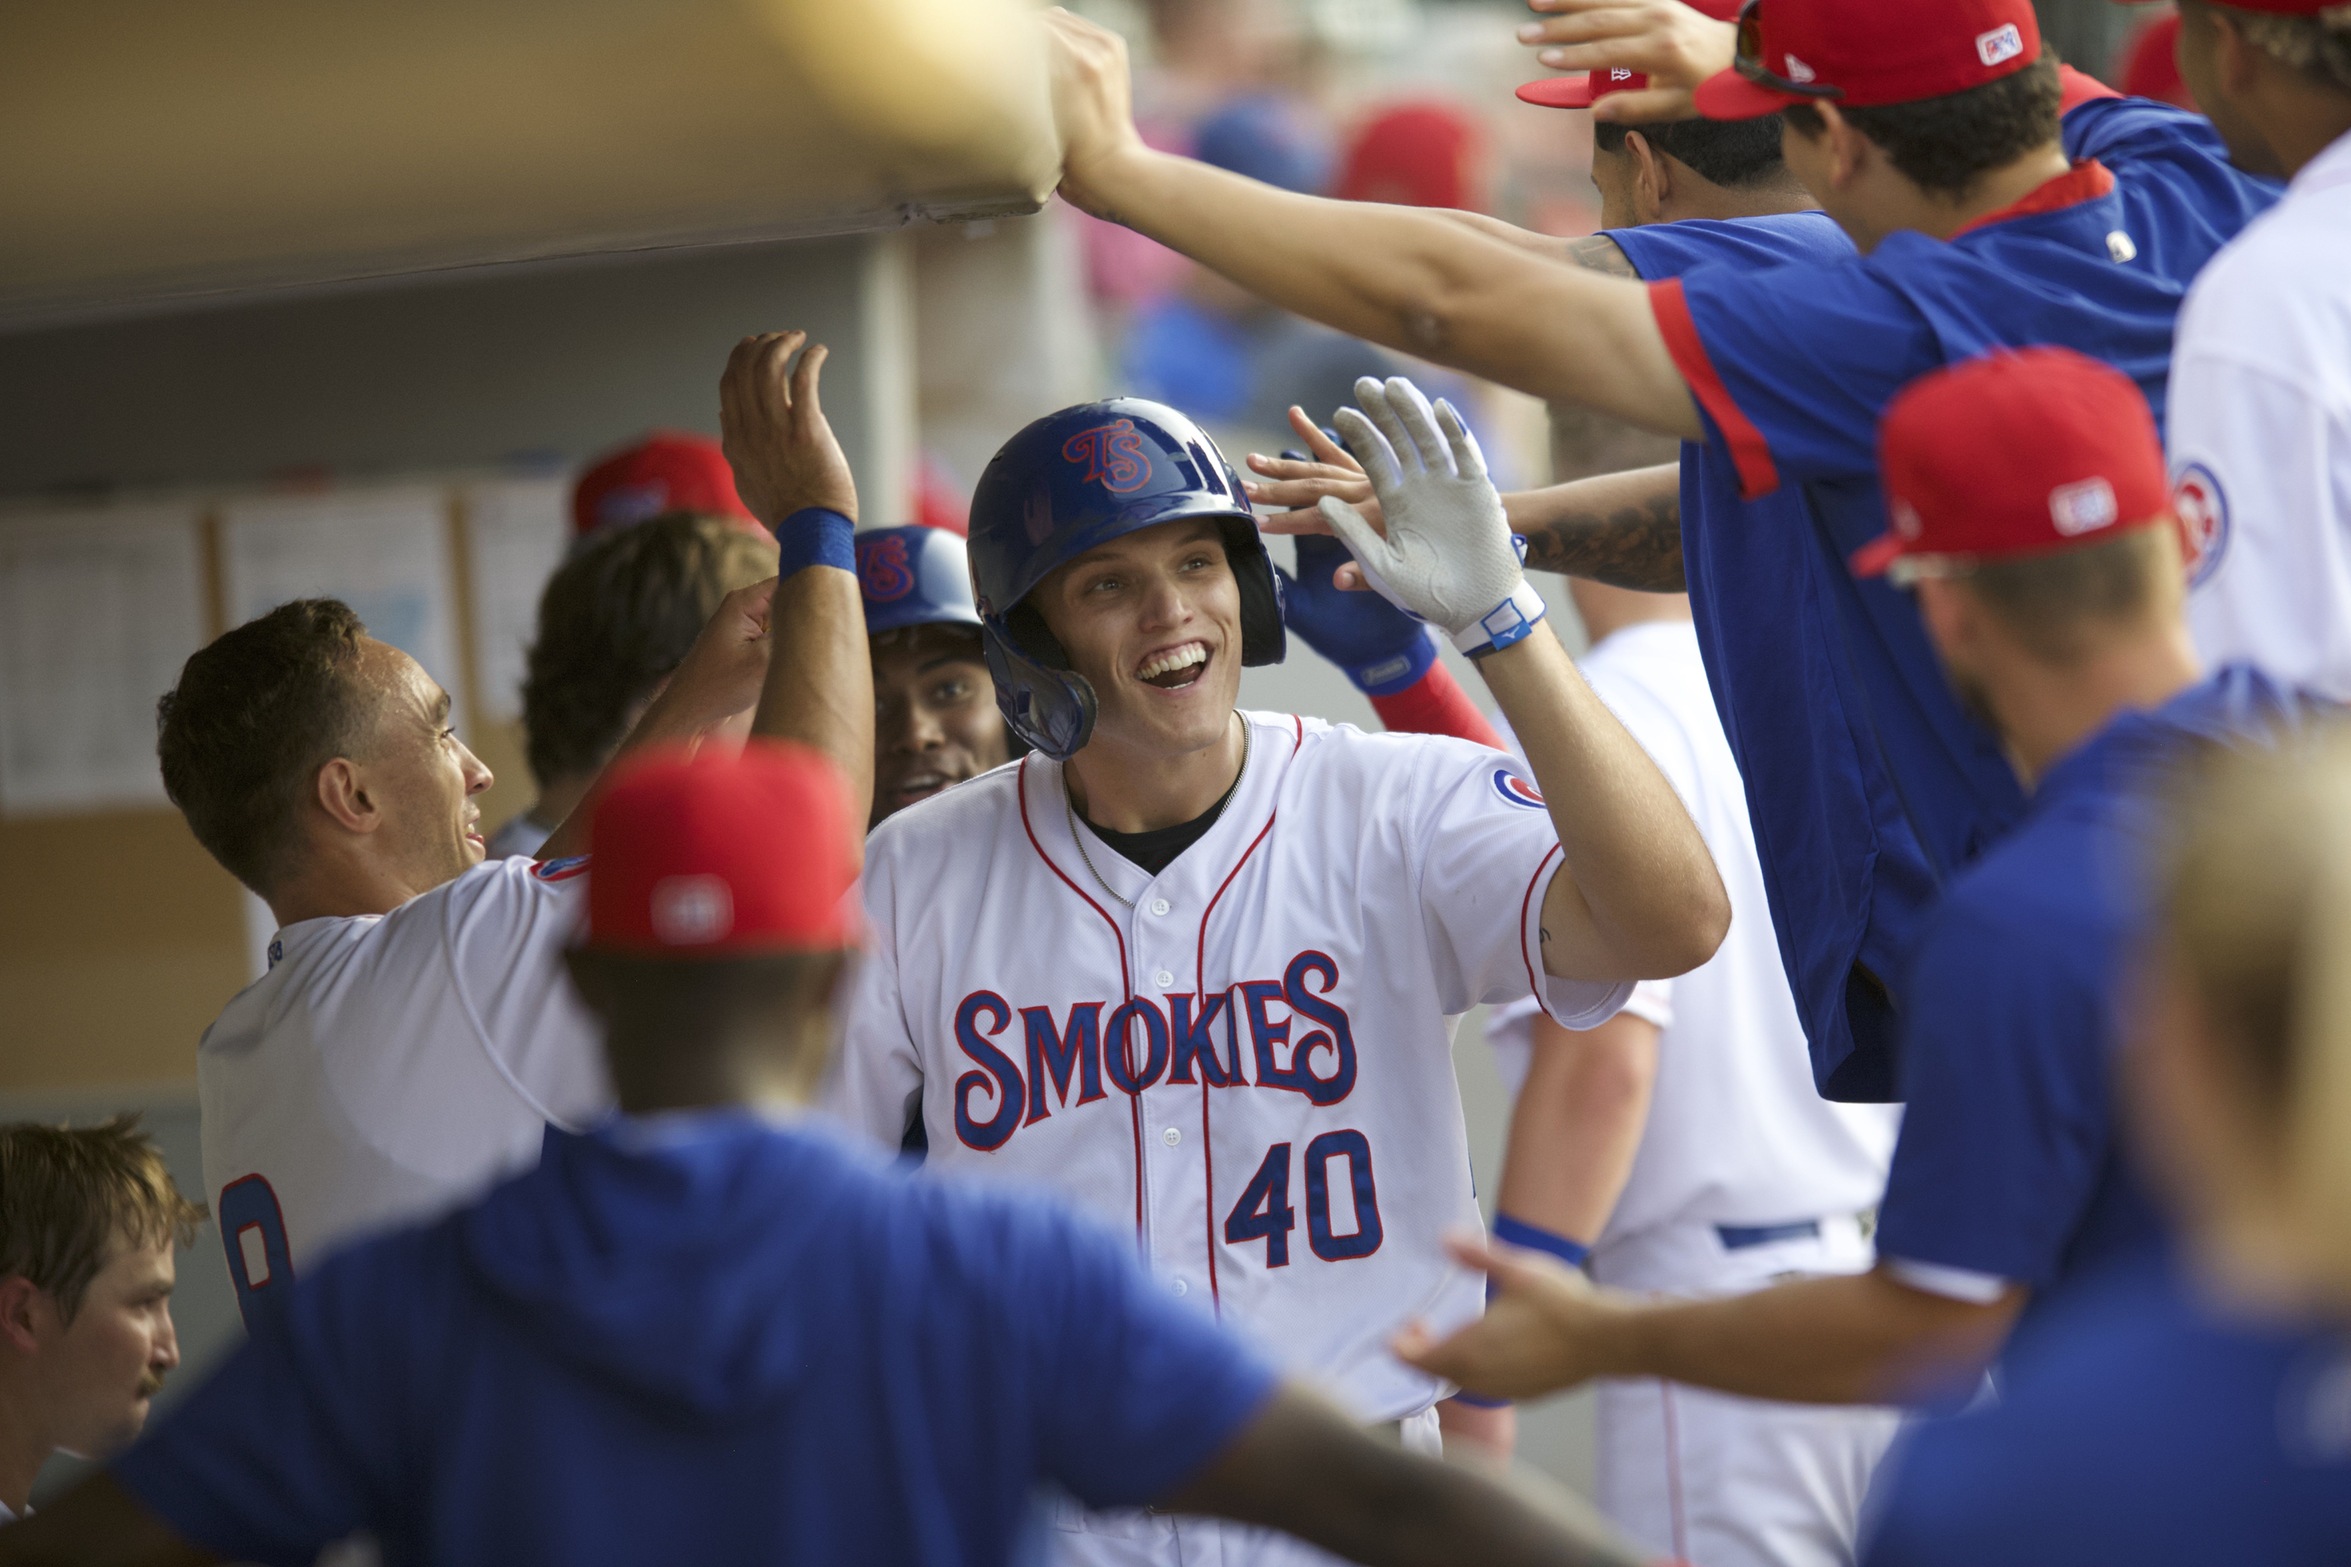 Bryce Ball of the Tennessee Smokies smiles in the dugout during a game this season. Photo courtesy of the Tennessee Smokies.